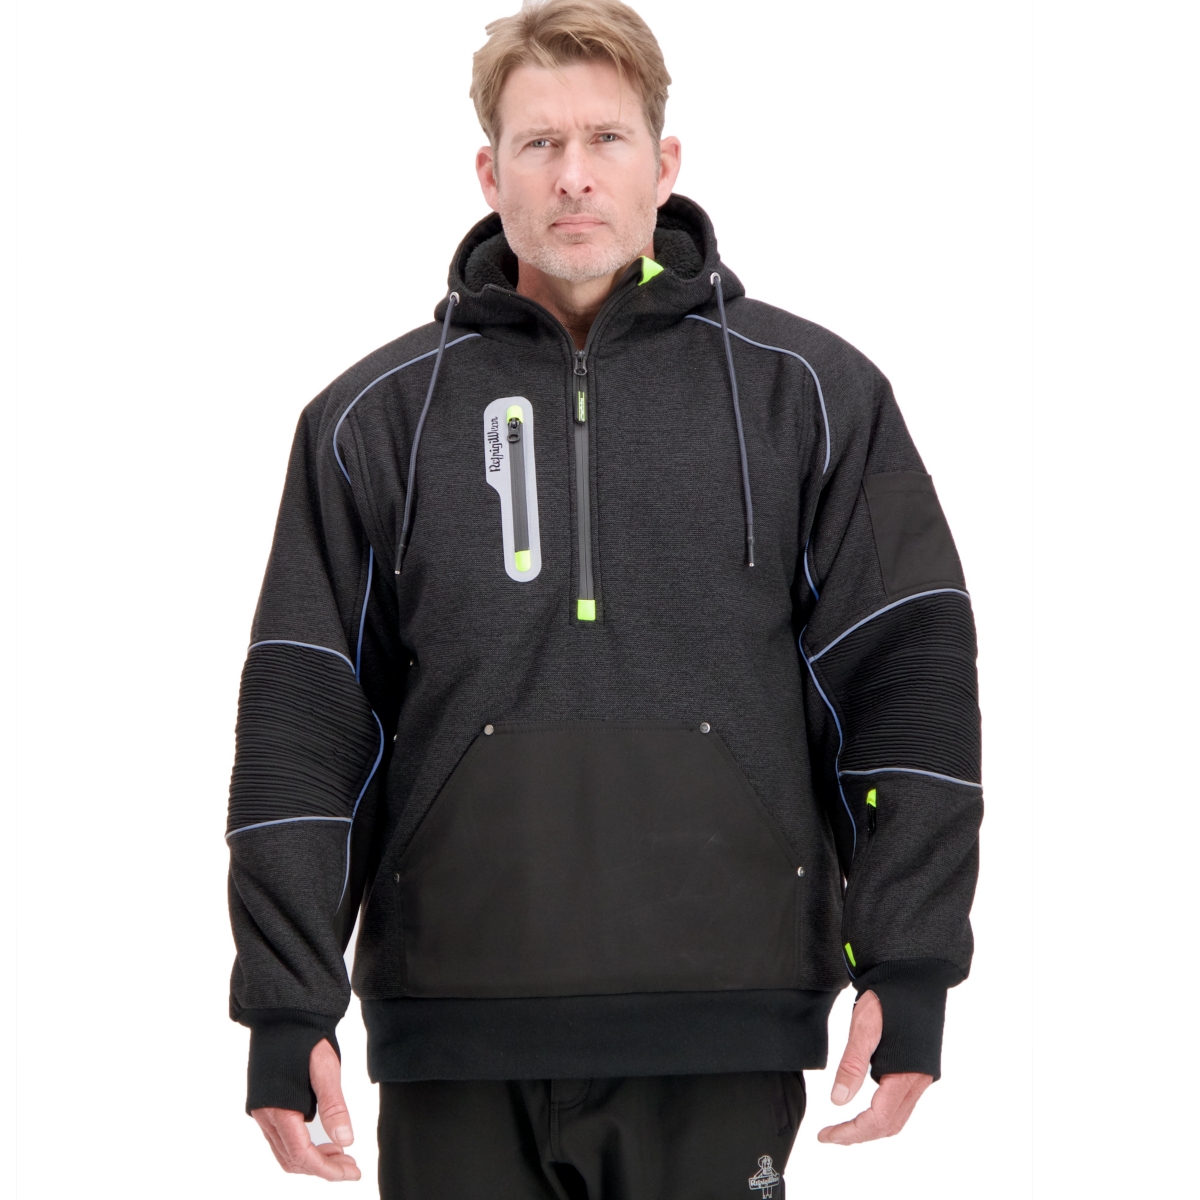 Big & Tall Extreme Hybrid Pullover Sweatshirt Reflective Insulated Hoodie - Black